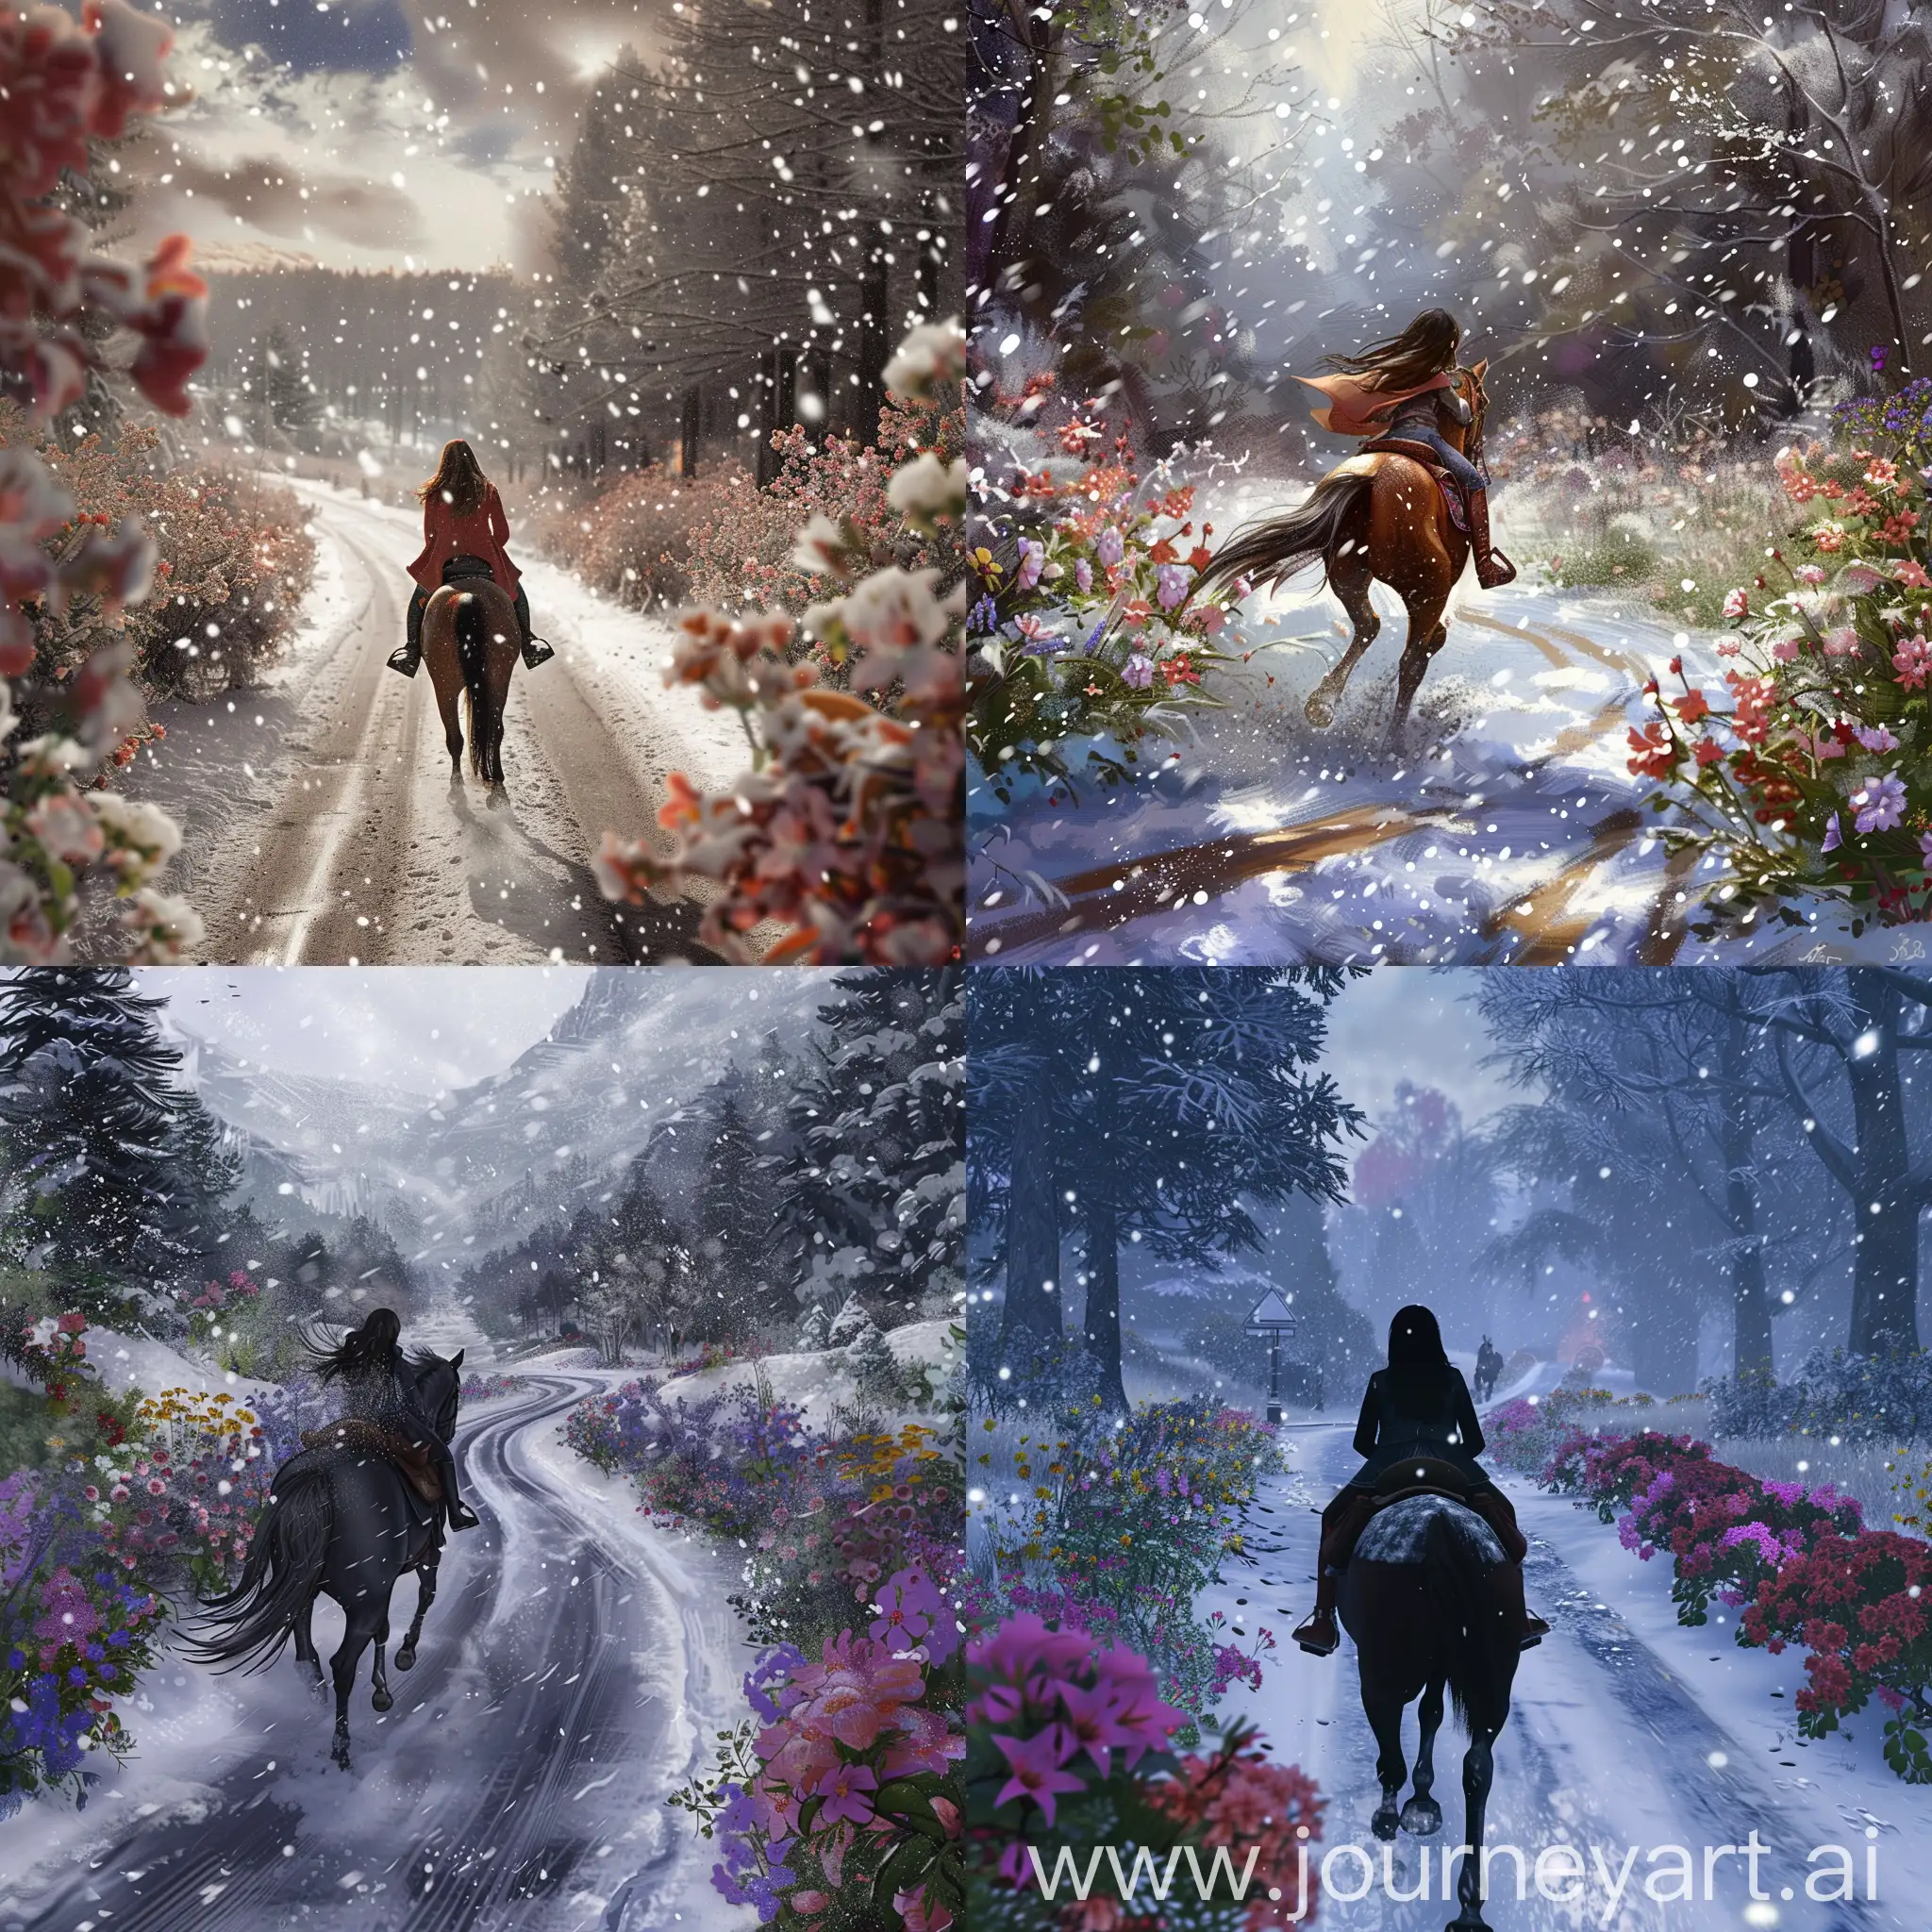 Girl-Galloping-Through-Snowy-Road-with-Blooming-Flowers